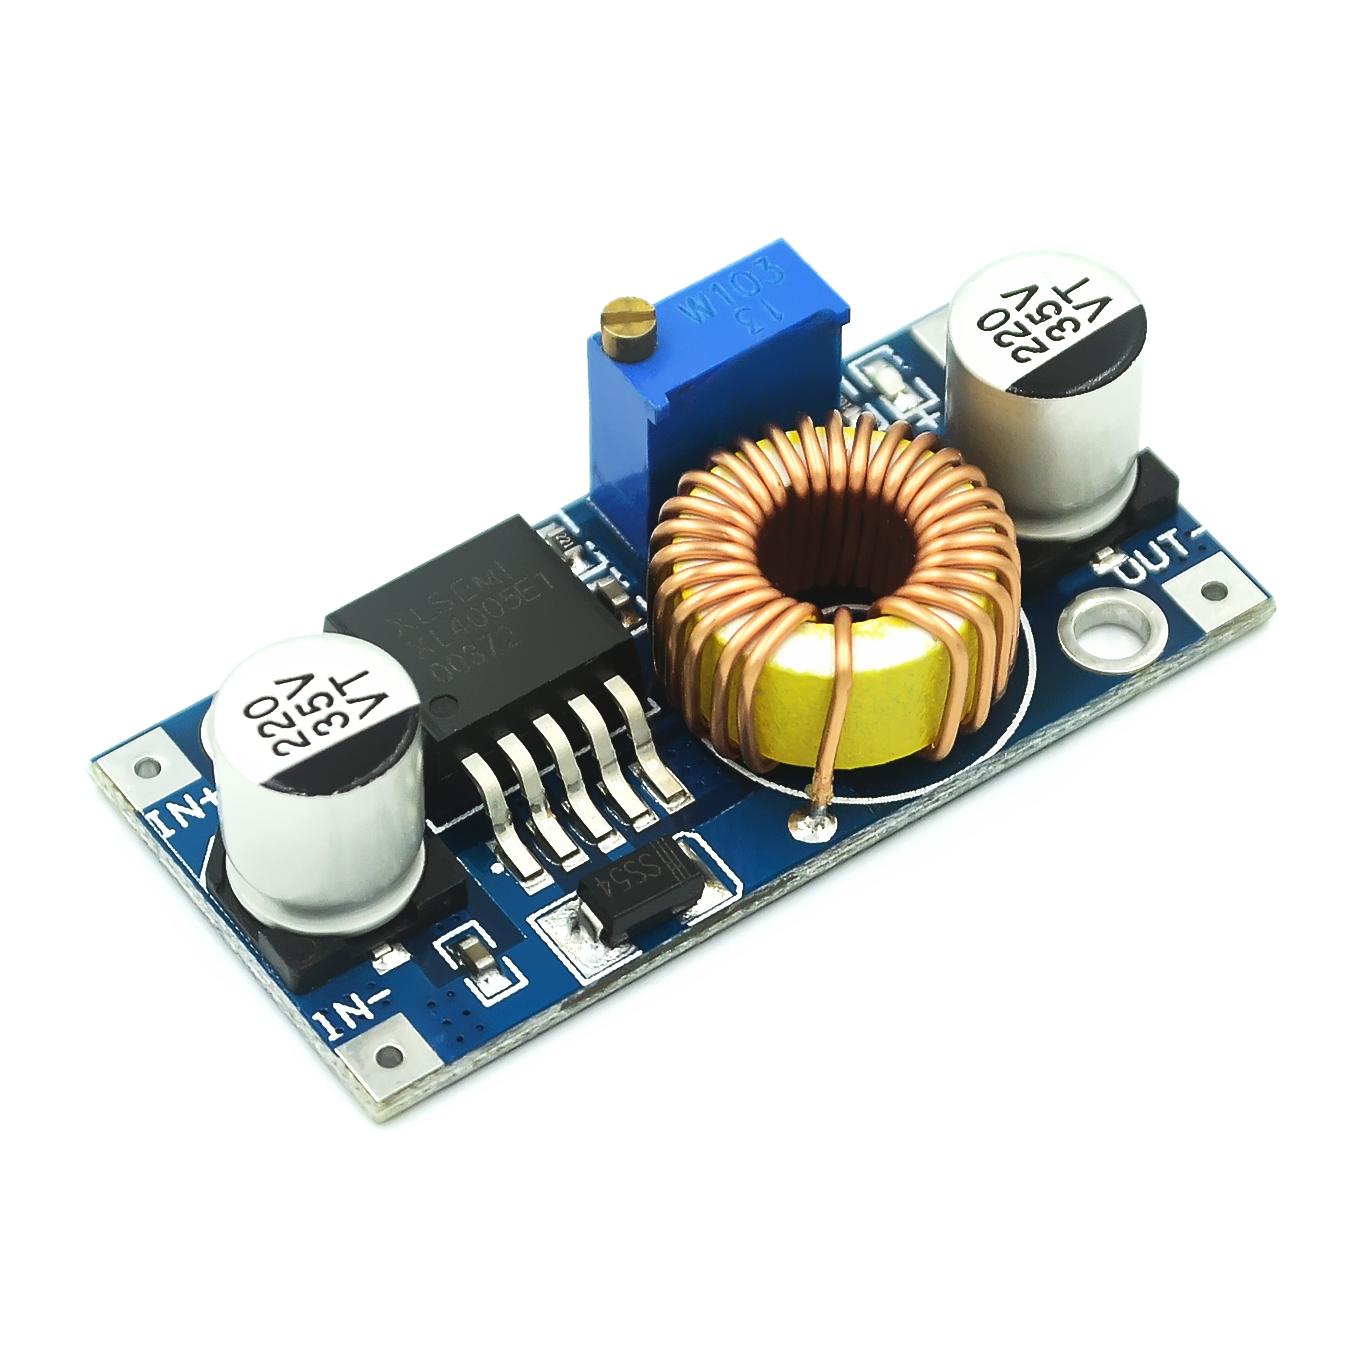 XL4005 DSN5000 Beyond LM2596 DC-DC adjustable step-down power Supply module ,5A High current,High power